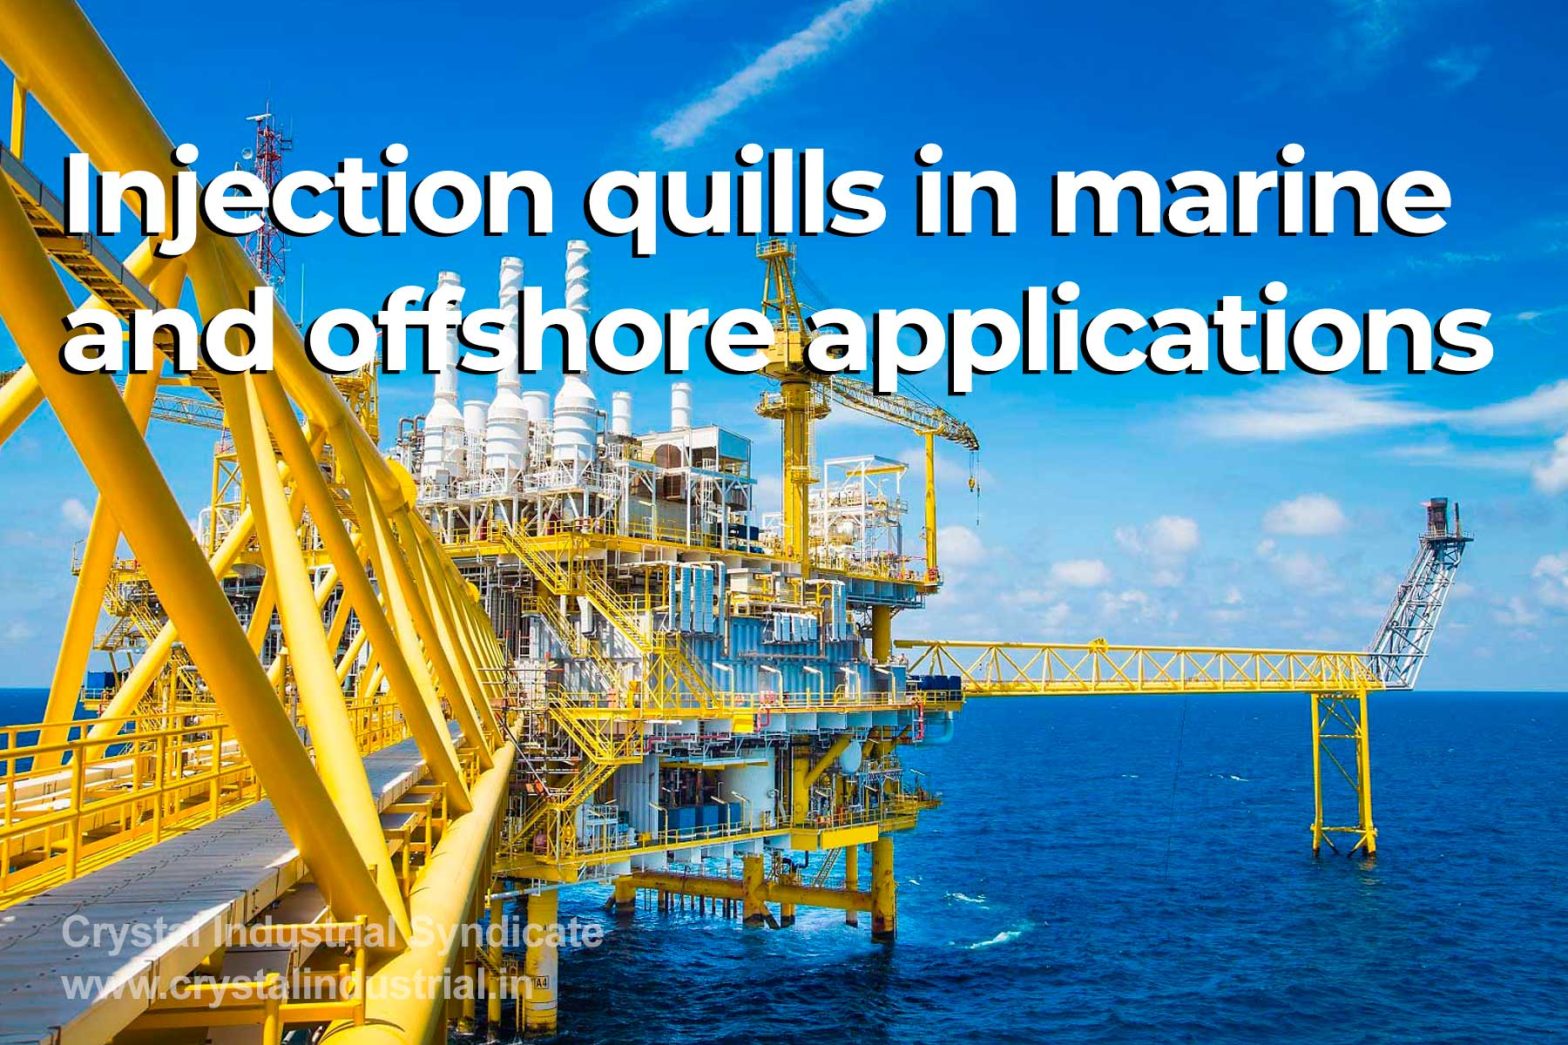 Injection quills in marine and offshore applications